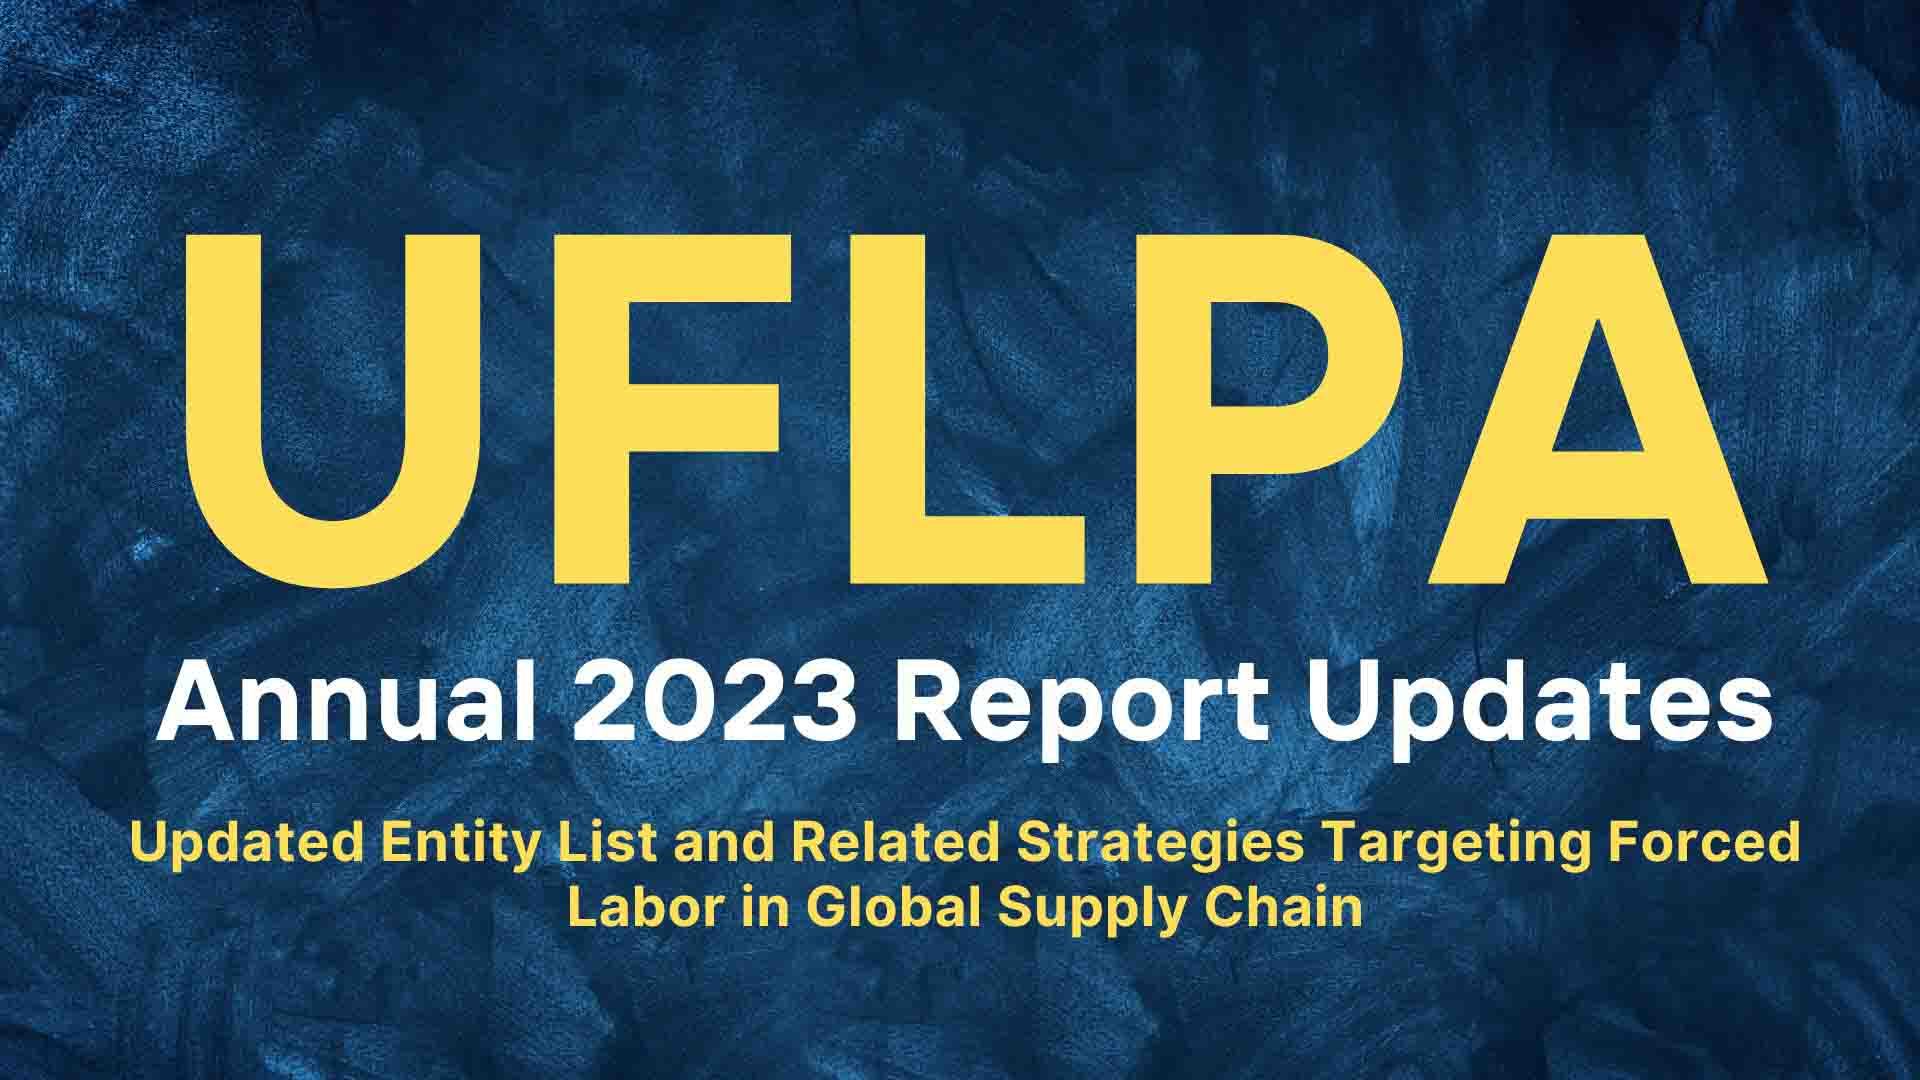 Latest Update to the Uyghur Forced Labor Prevention Act (UFLPA) Strategy